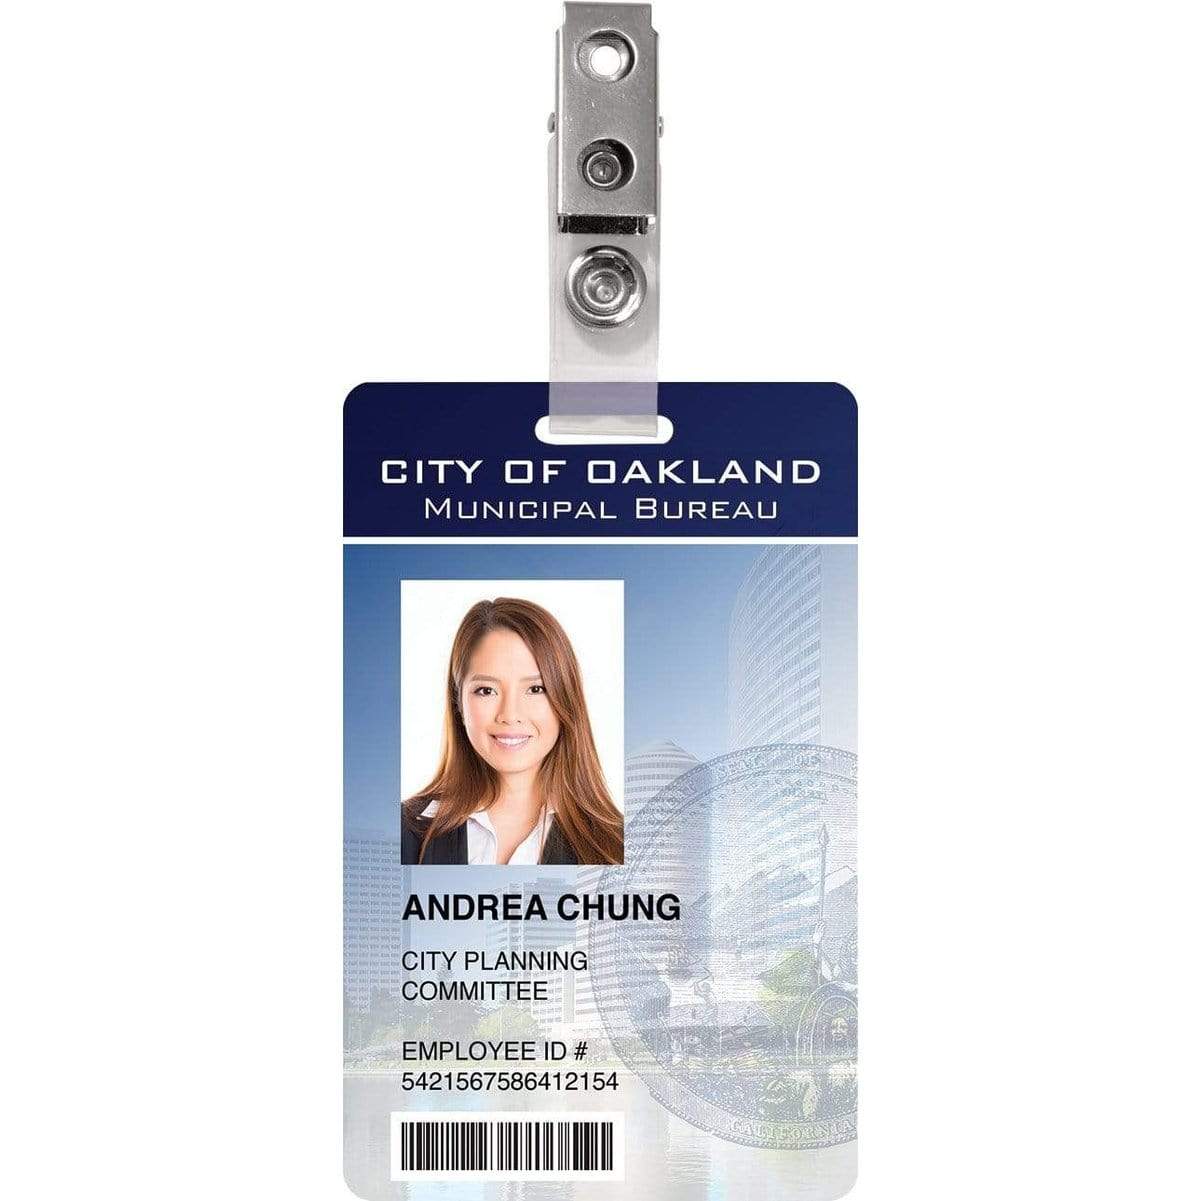 City of Oakland Municipal Bureau ID badge displaying a photo of a woman named Andrea Chung, part of the City Planning Committee, secured with an ID Badge Strap Clips (Industry Standard Clip). Employee ID #5421657586412154.